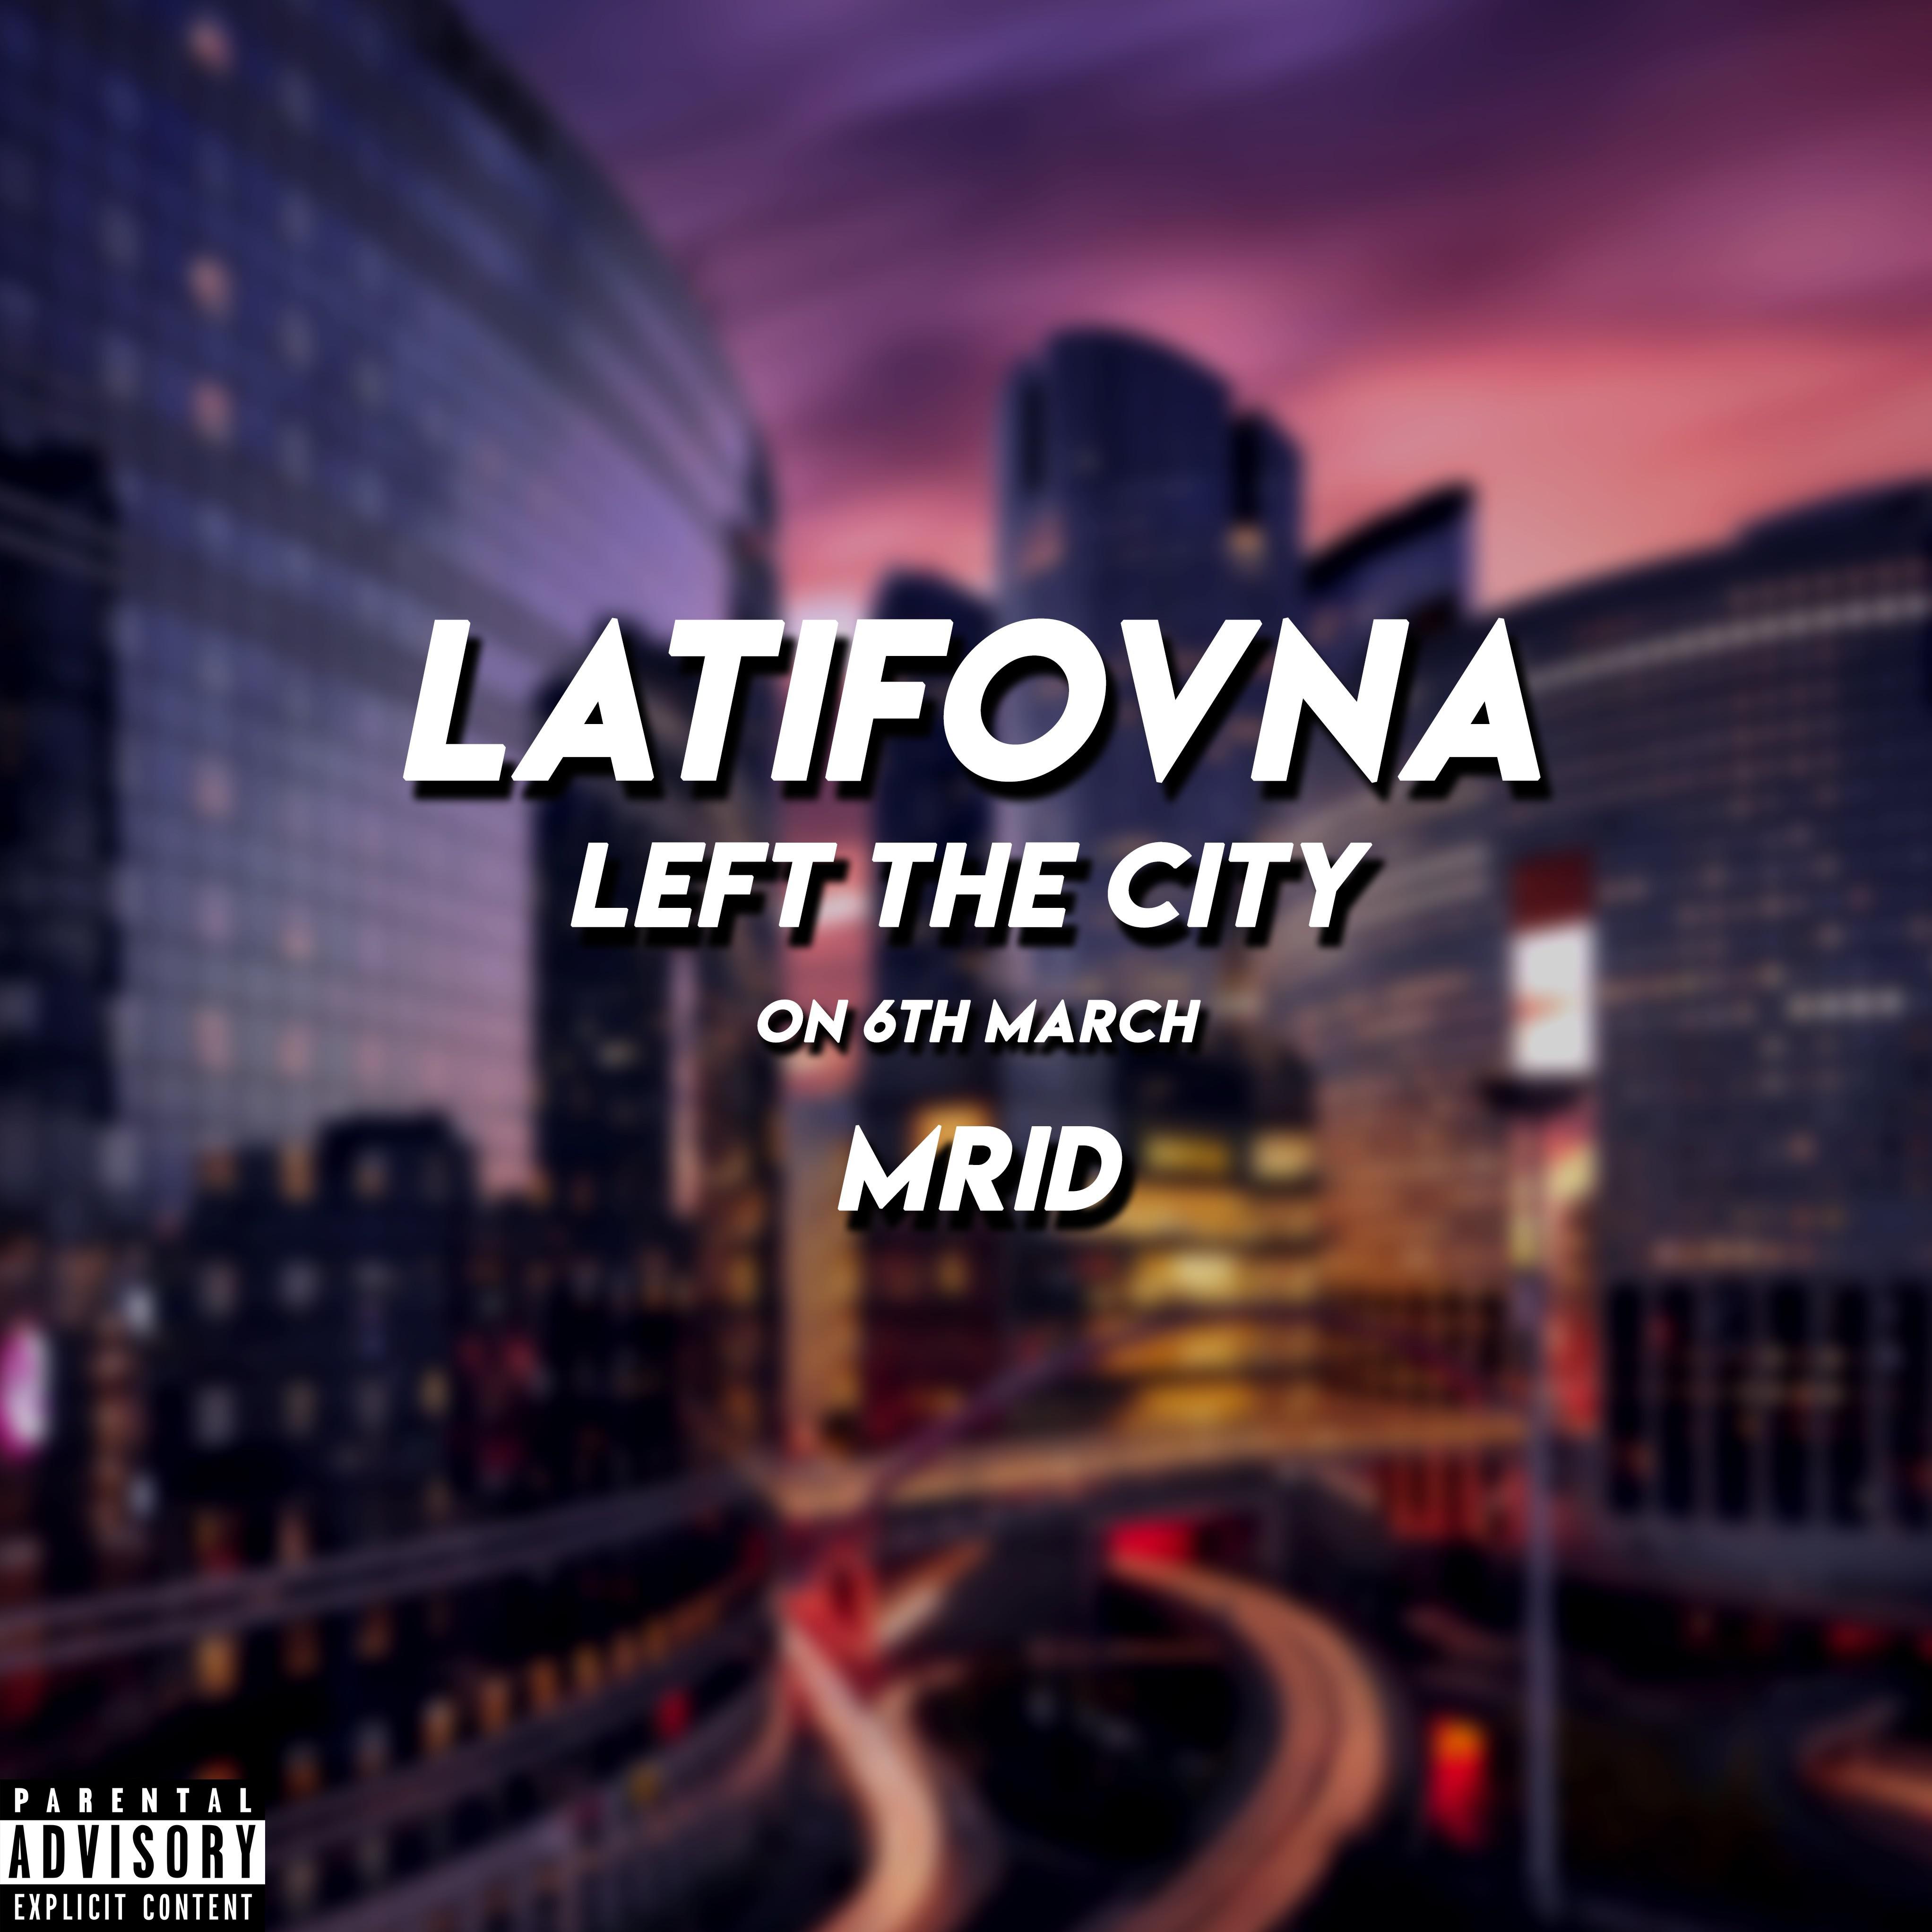 Latifovna Left the City on 6th March